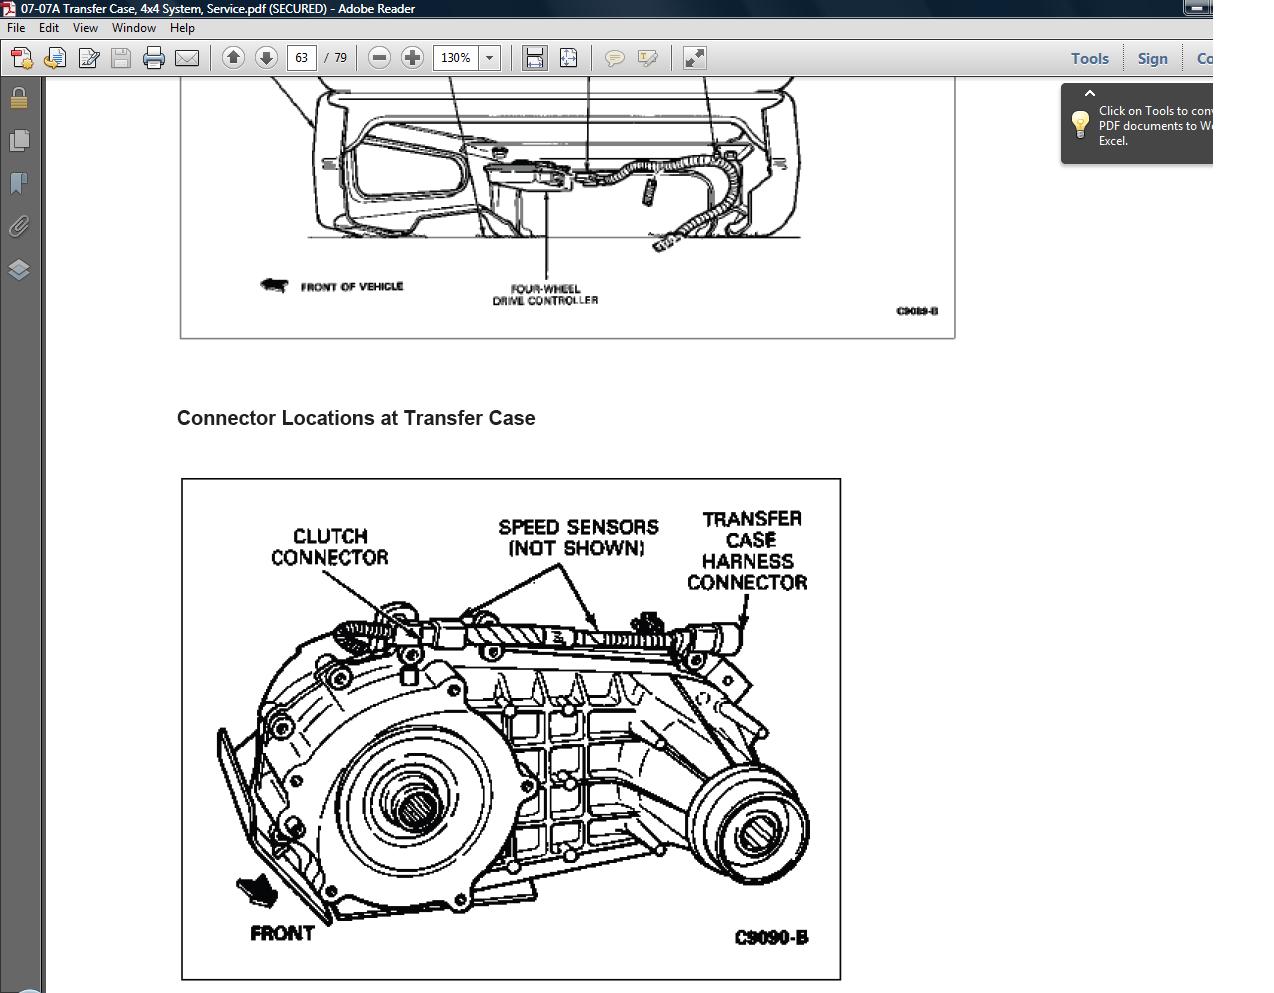 Download 2001 ford ranger owners manual #5